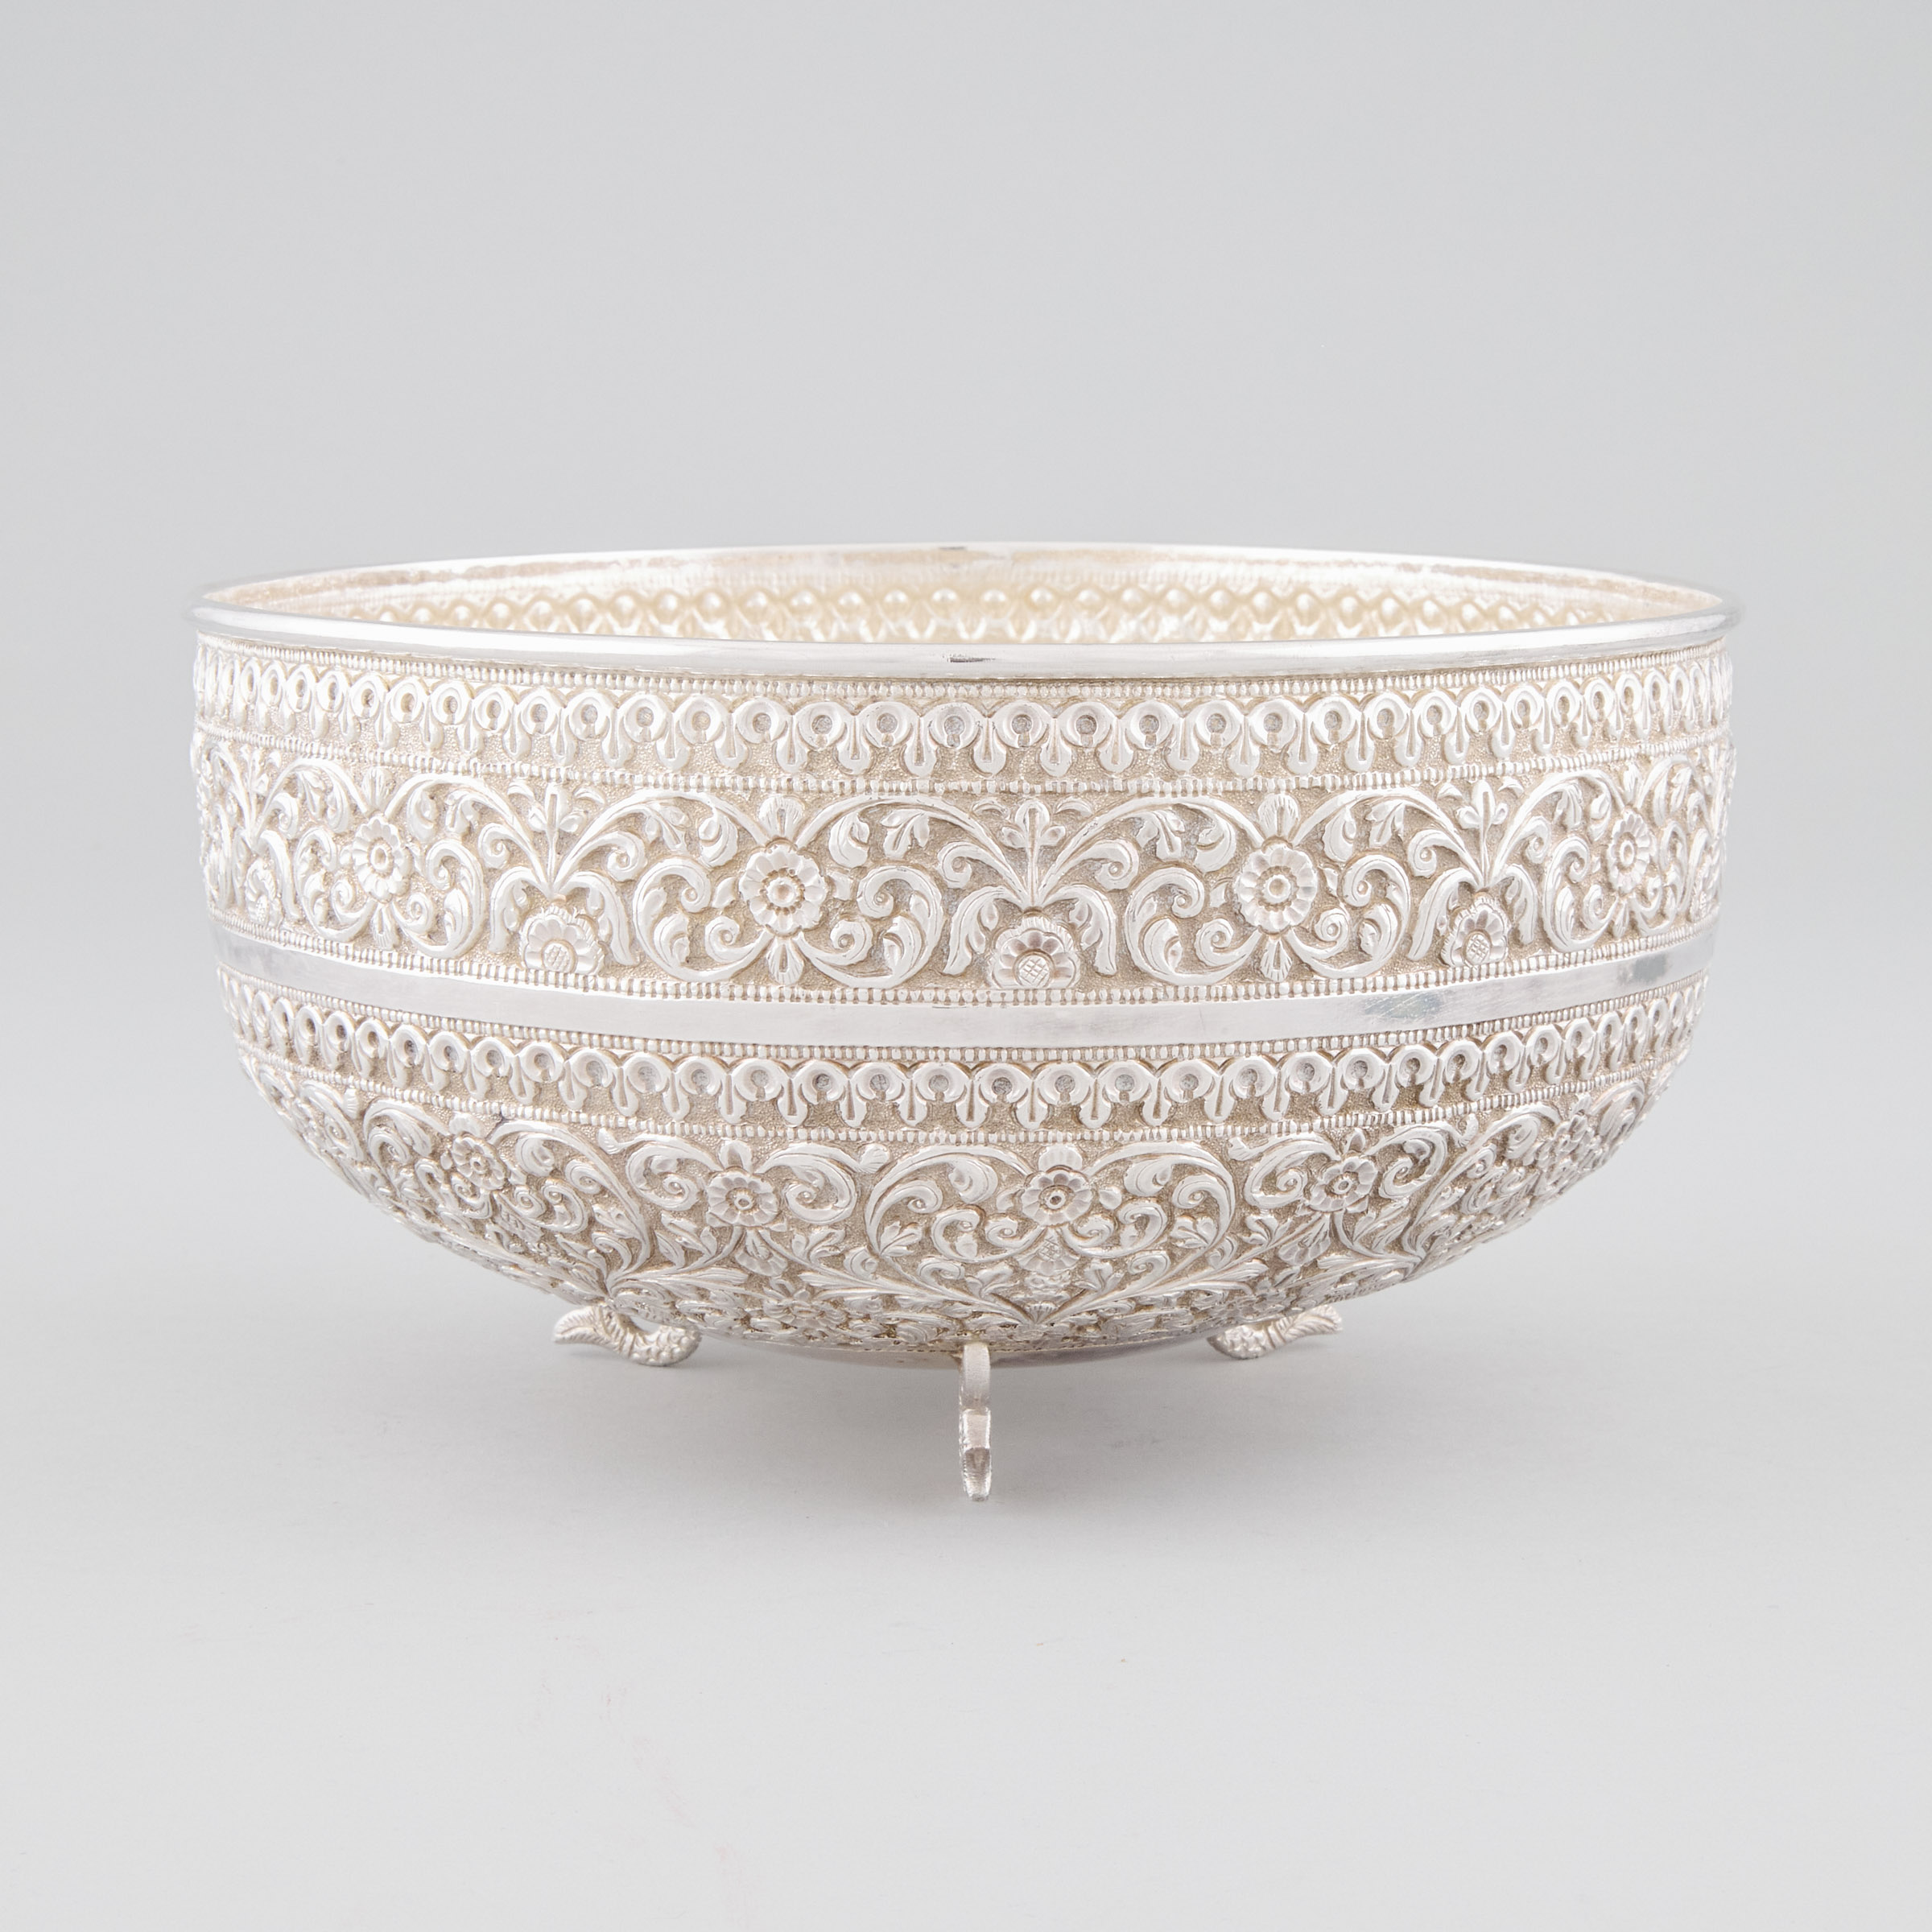 Indian Repoussé and Engraved Silver Bowl, 20th century